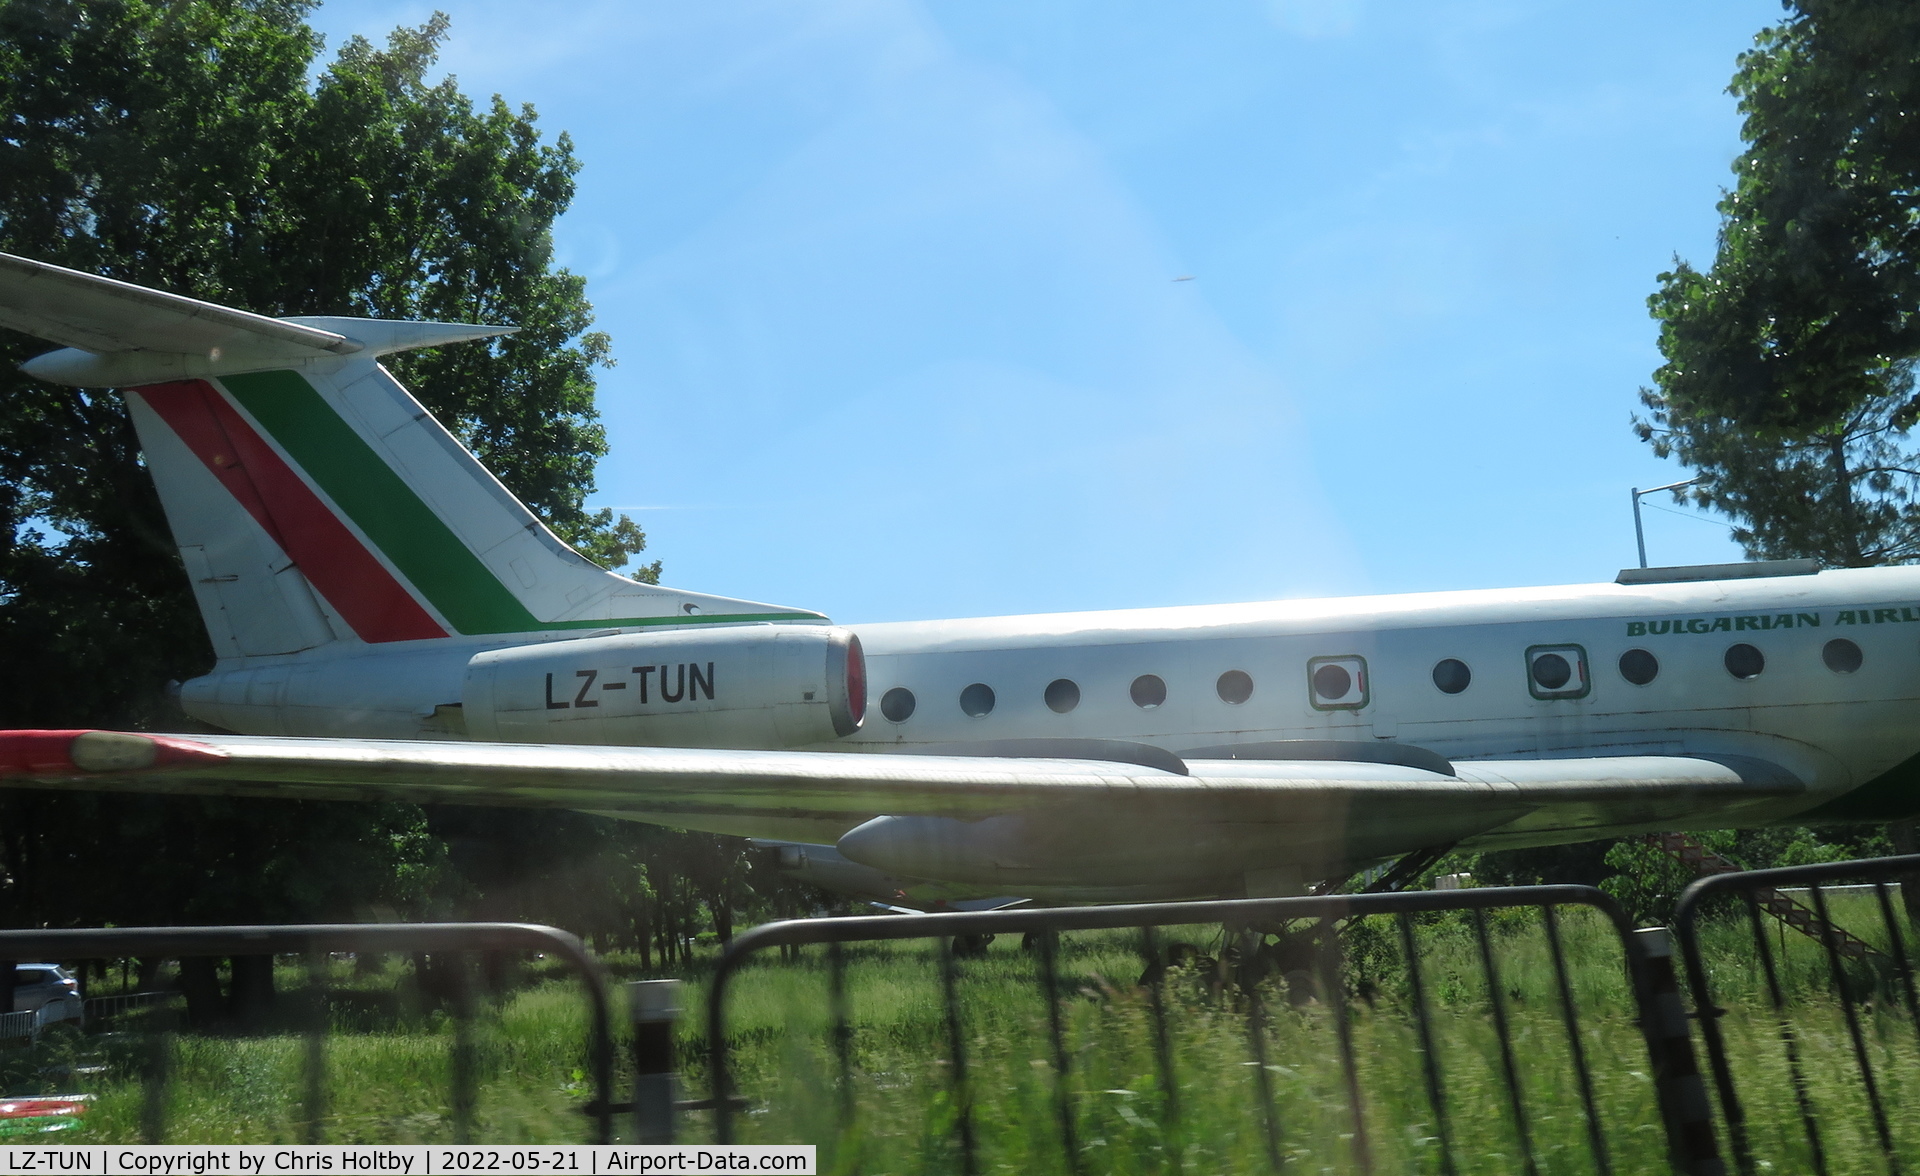 LZ-TUN, 1974 Tupolev Tu-134A C/N 4352307, De-registered and stored at Sofia Aiport in Bulgarian Airlines livery.